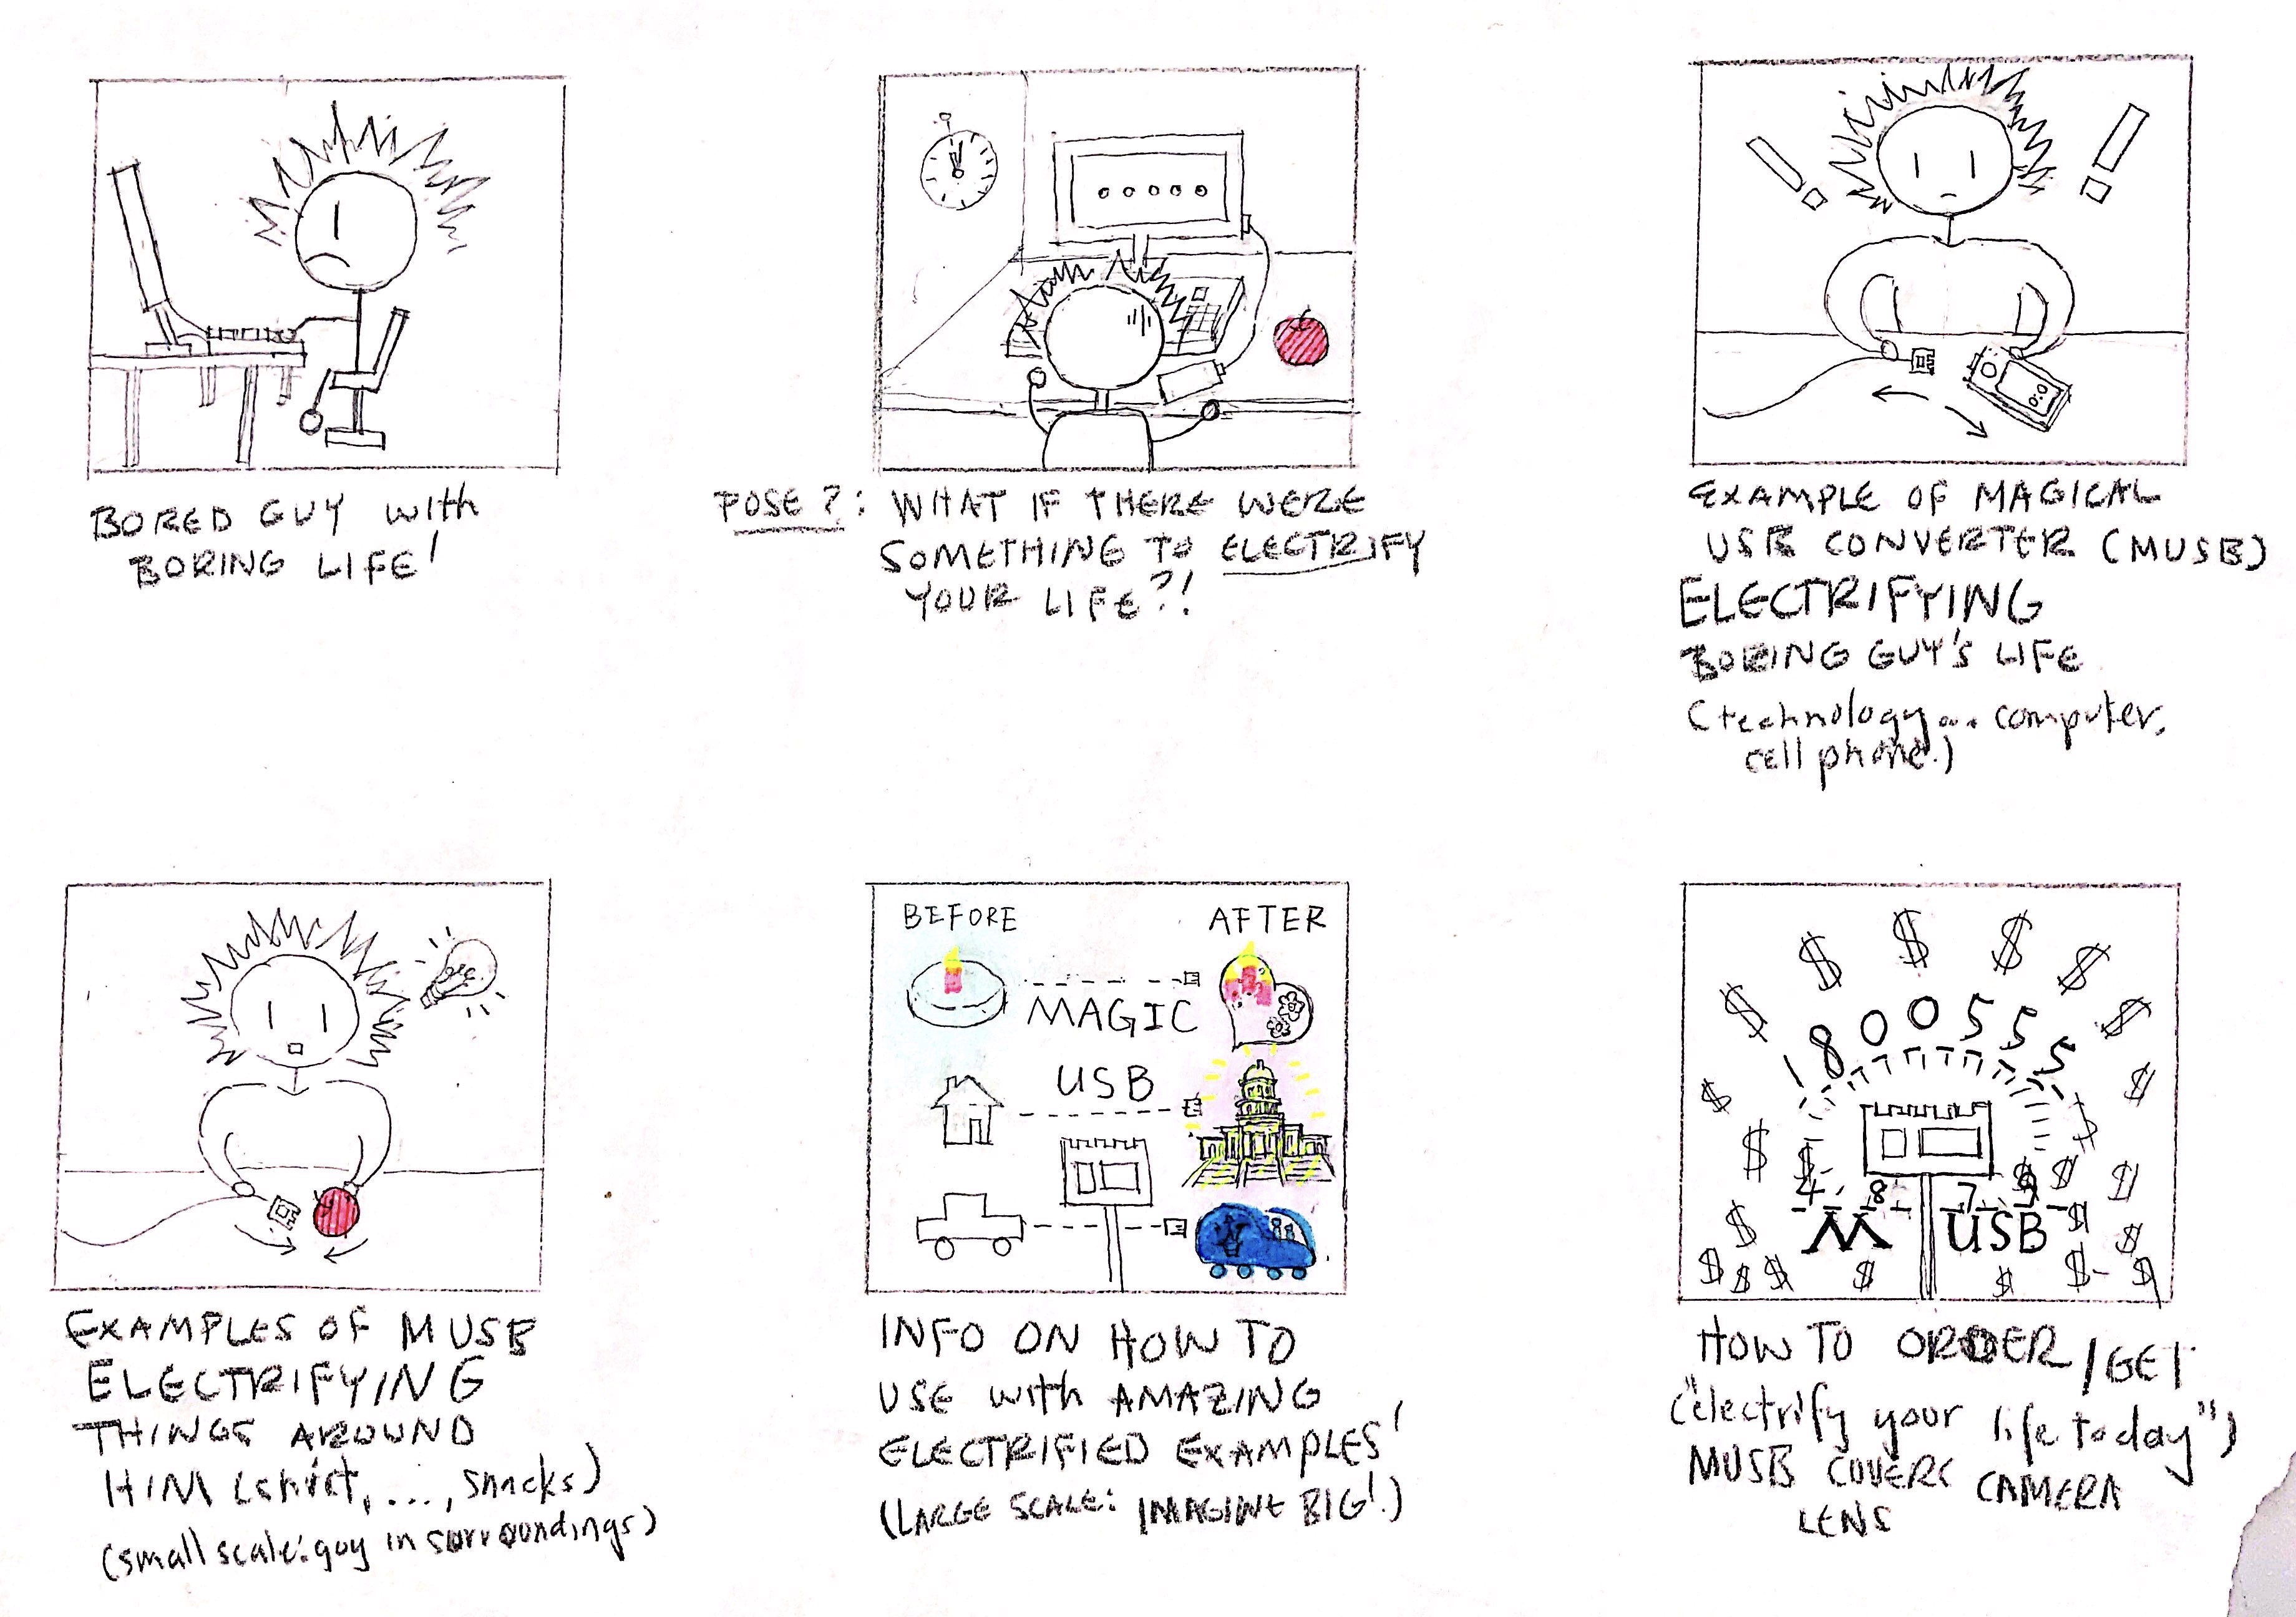 Colorized Version of Storyboard for Magical USB in preparation for our video project.